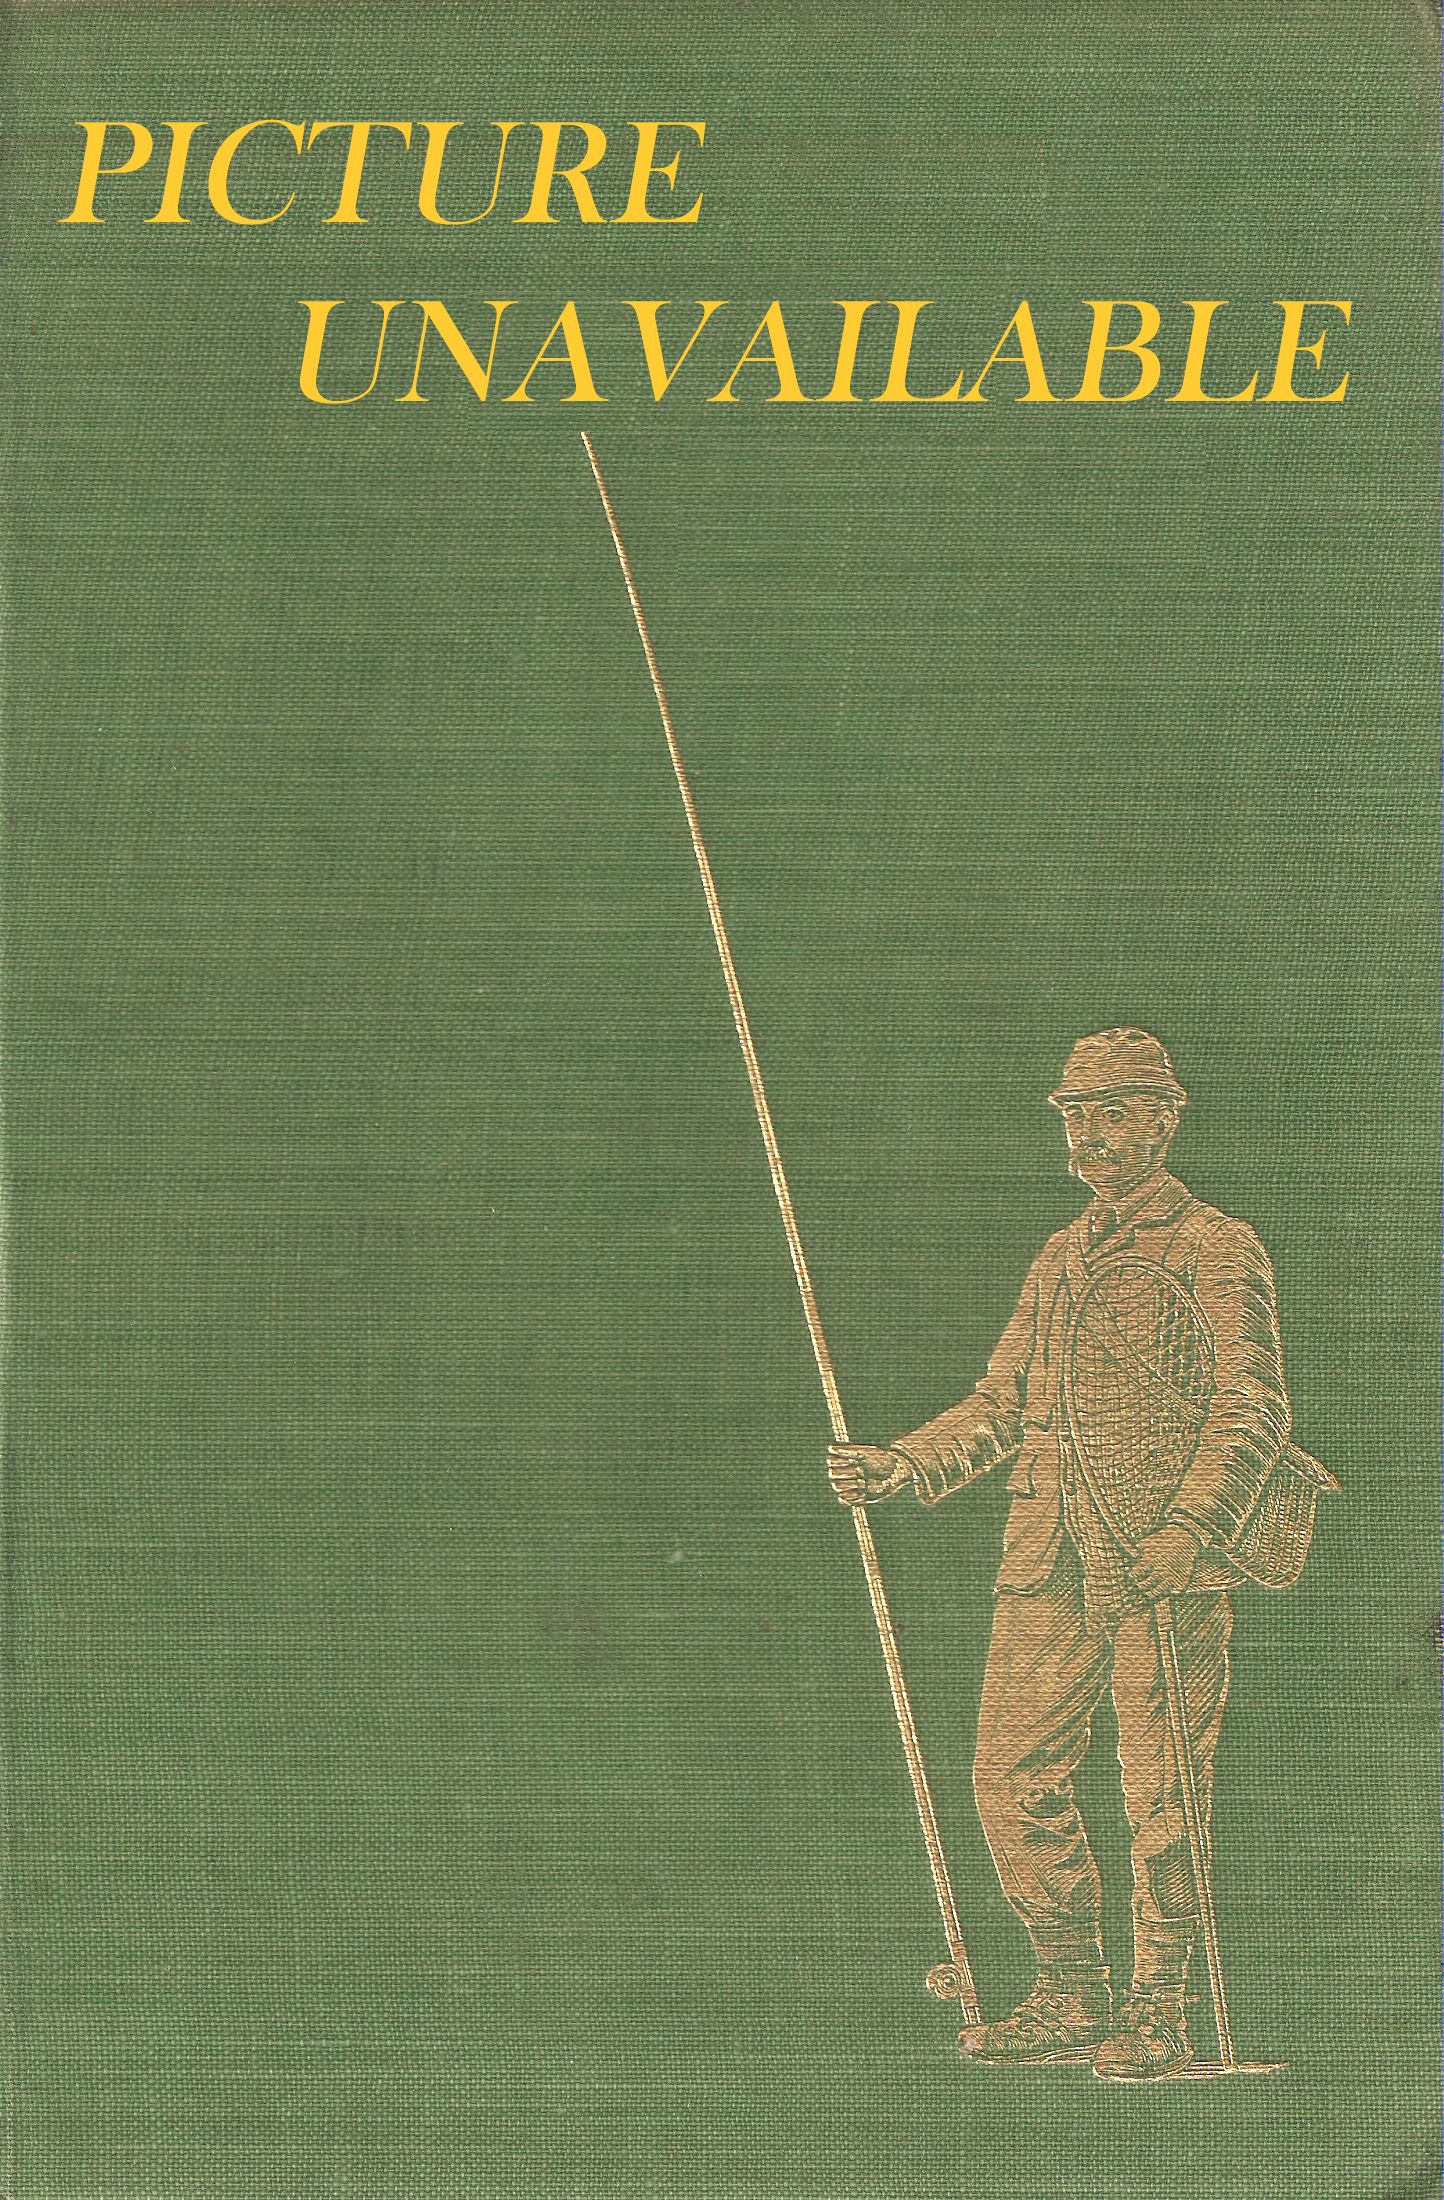 MY SPORTING LIFE. By John Waller Hills. Flyfisher's Classic Library edition.